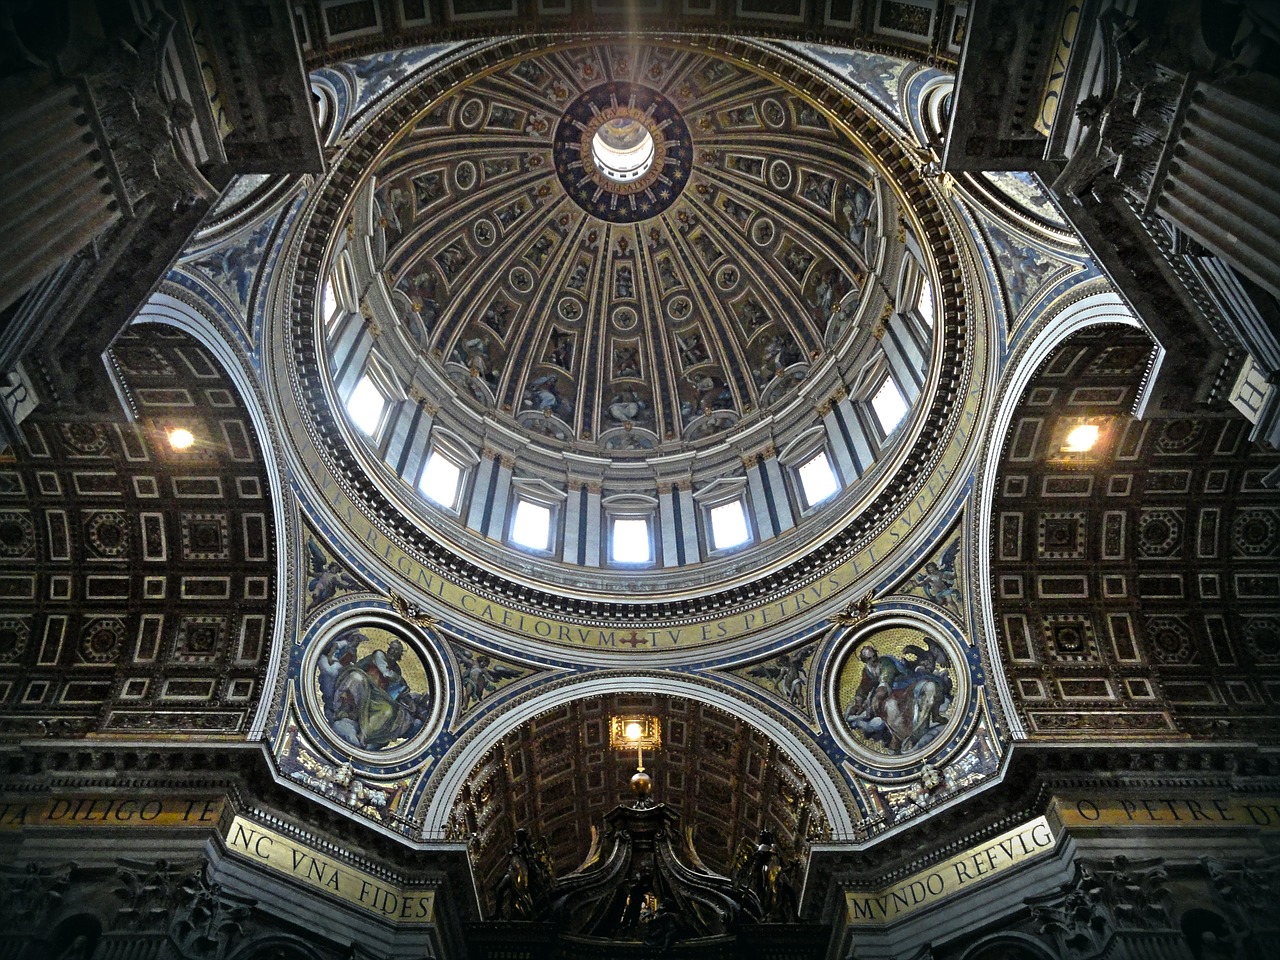 View of the Saint Peter's Basilica's dome from inside